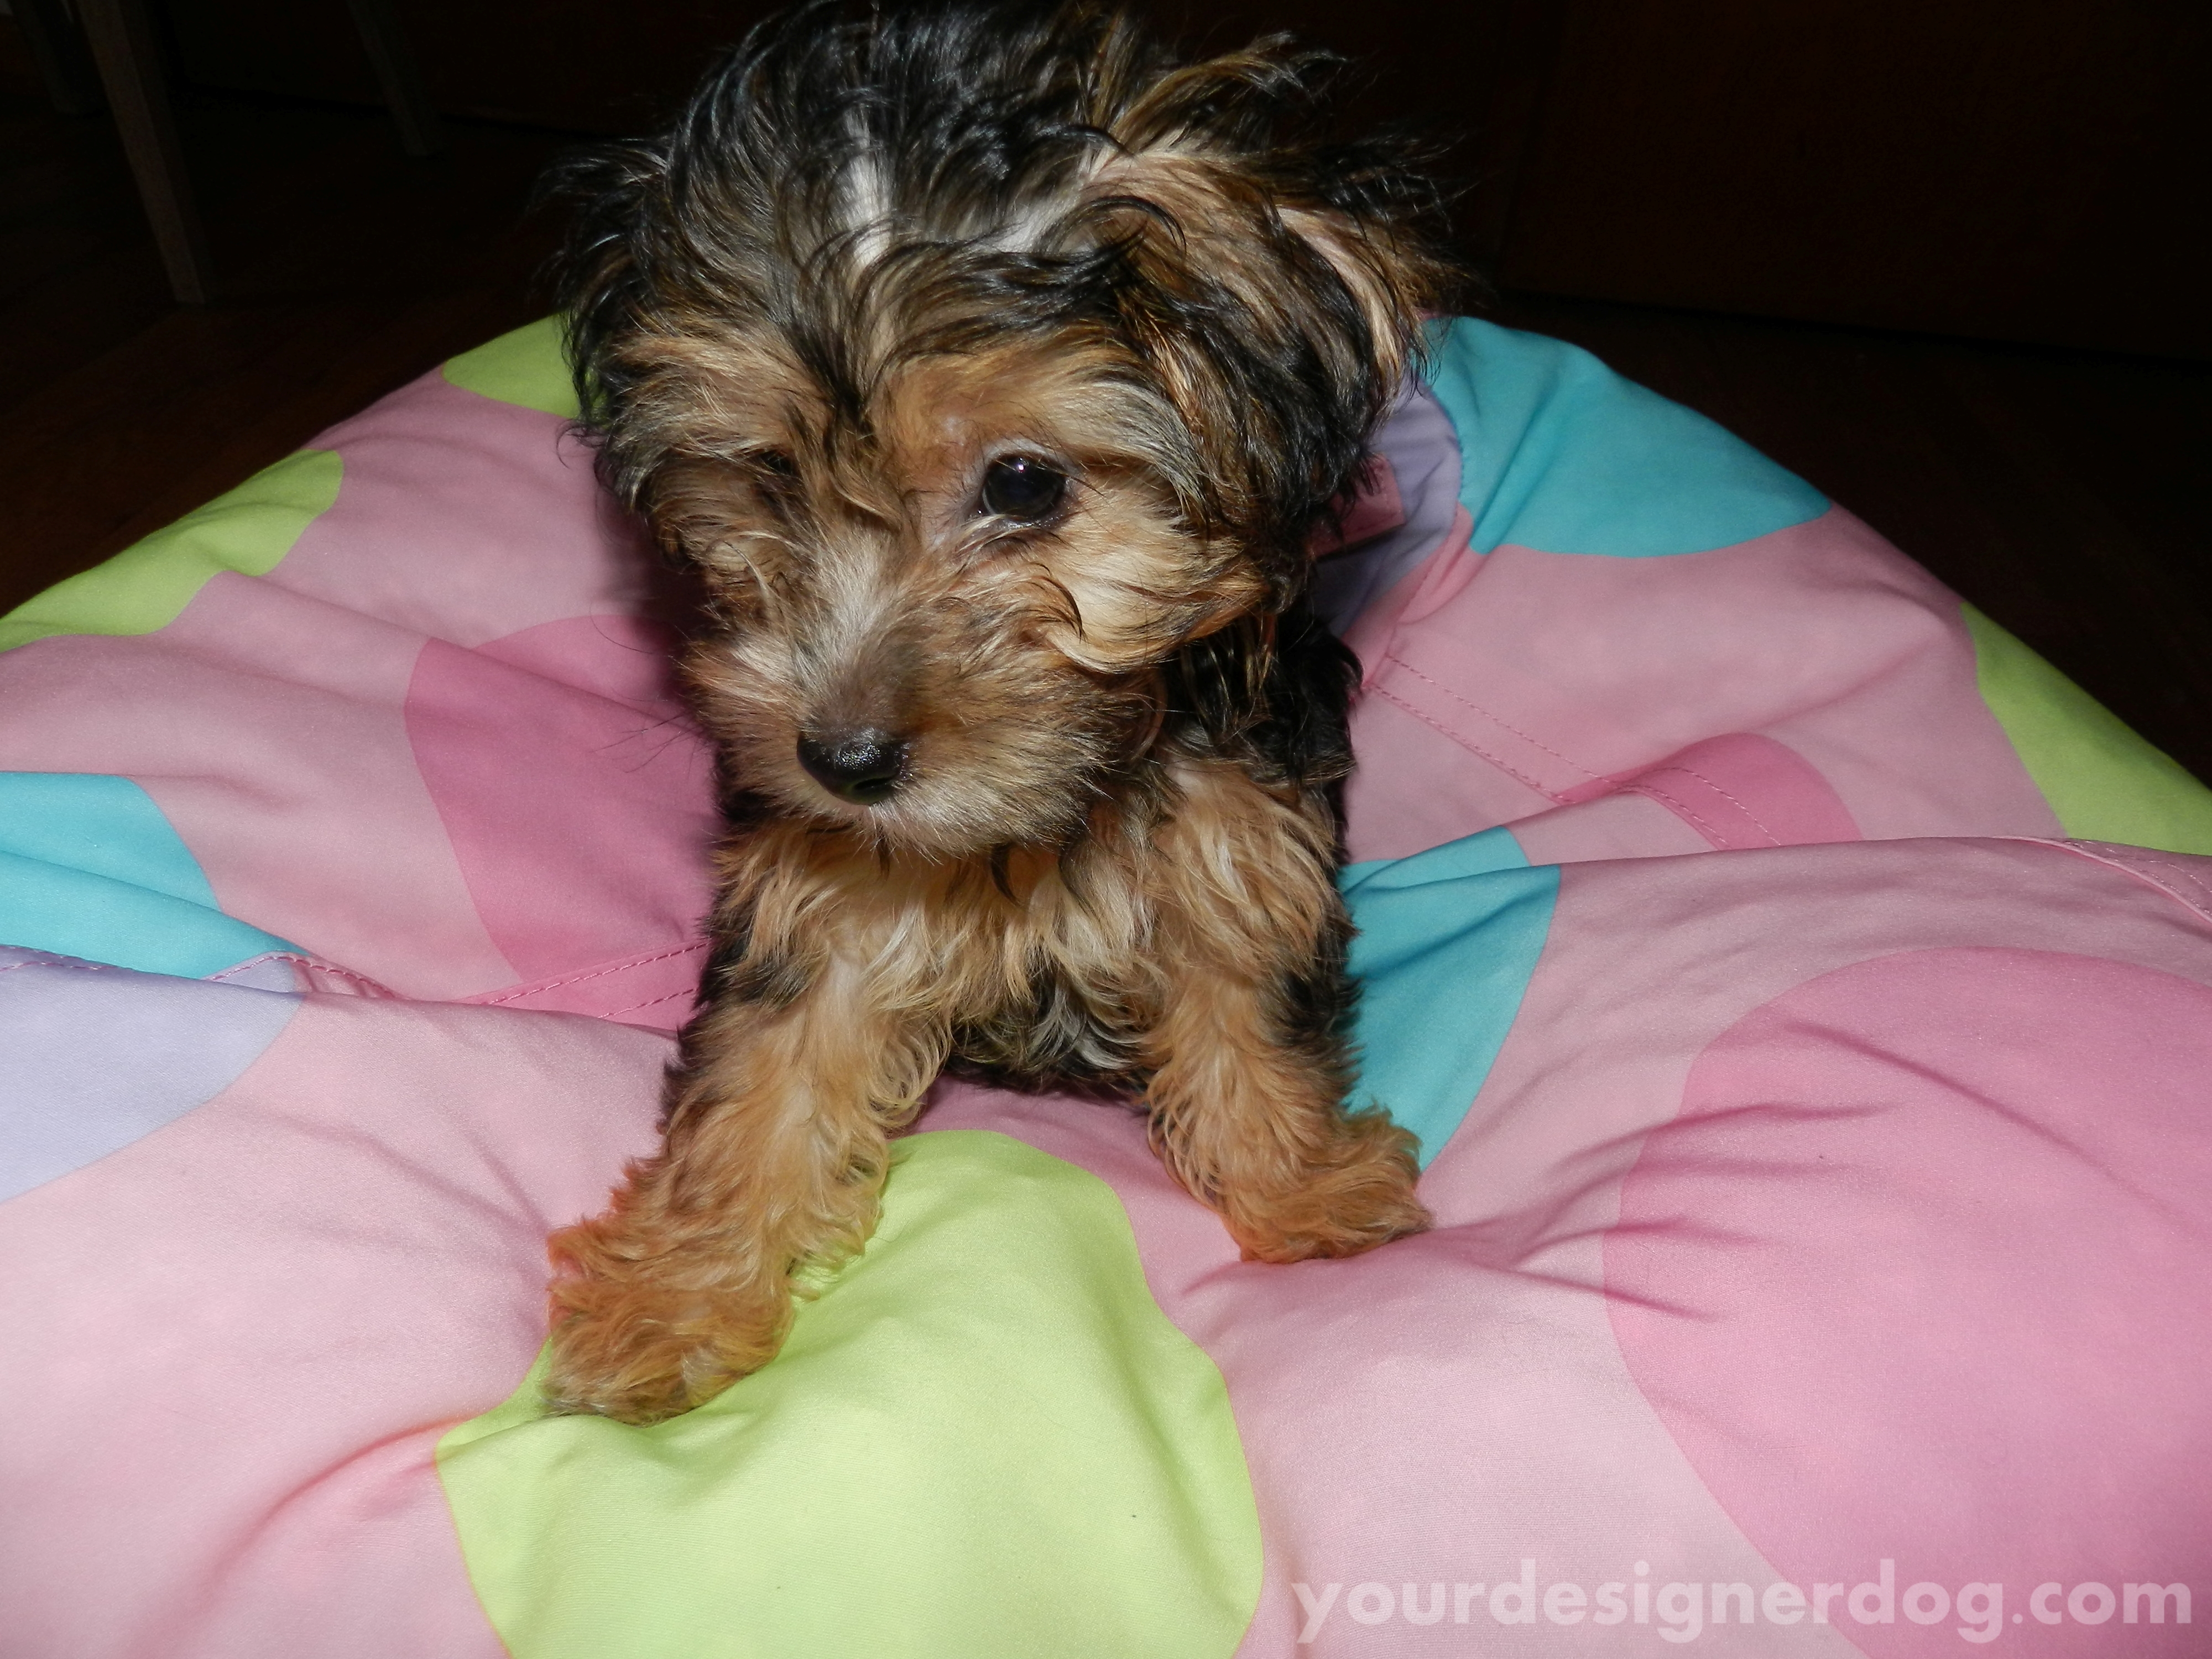 dogs, designer dogs, yorkipoo, yorkie poo, bean bag chair, puppy